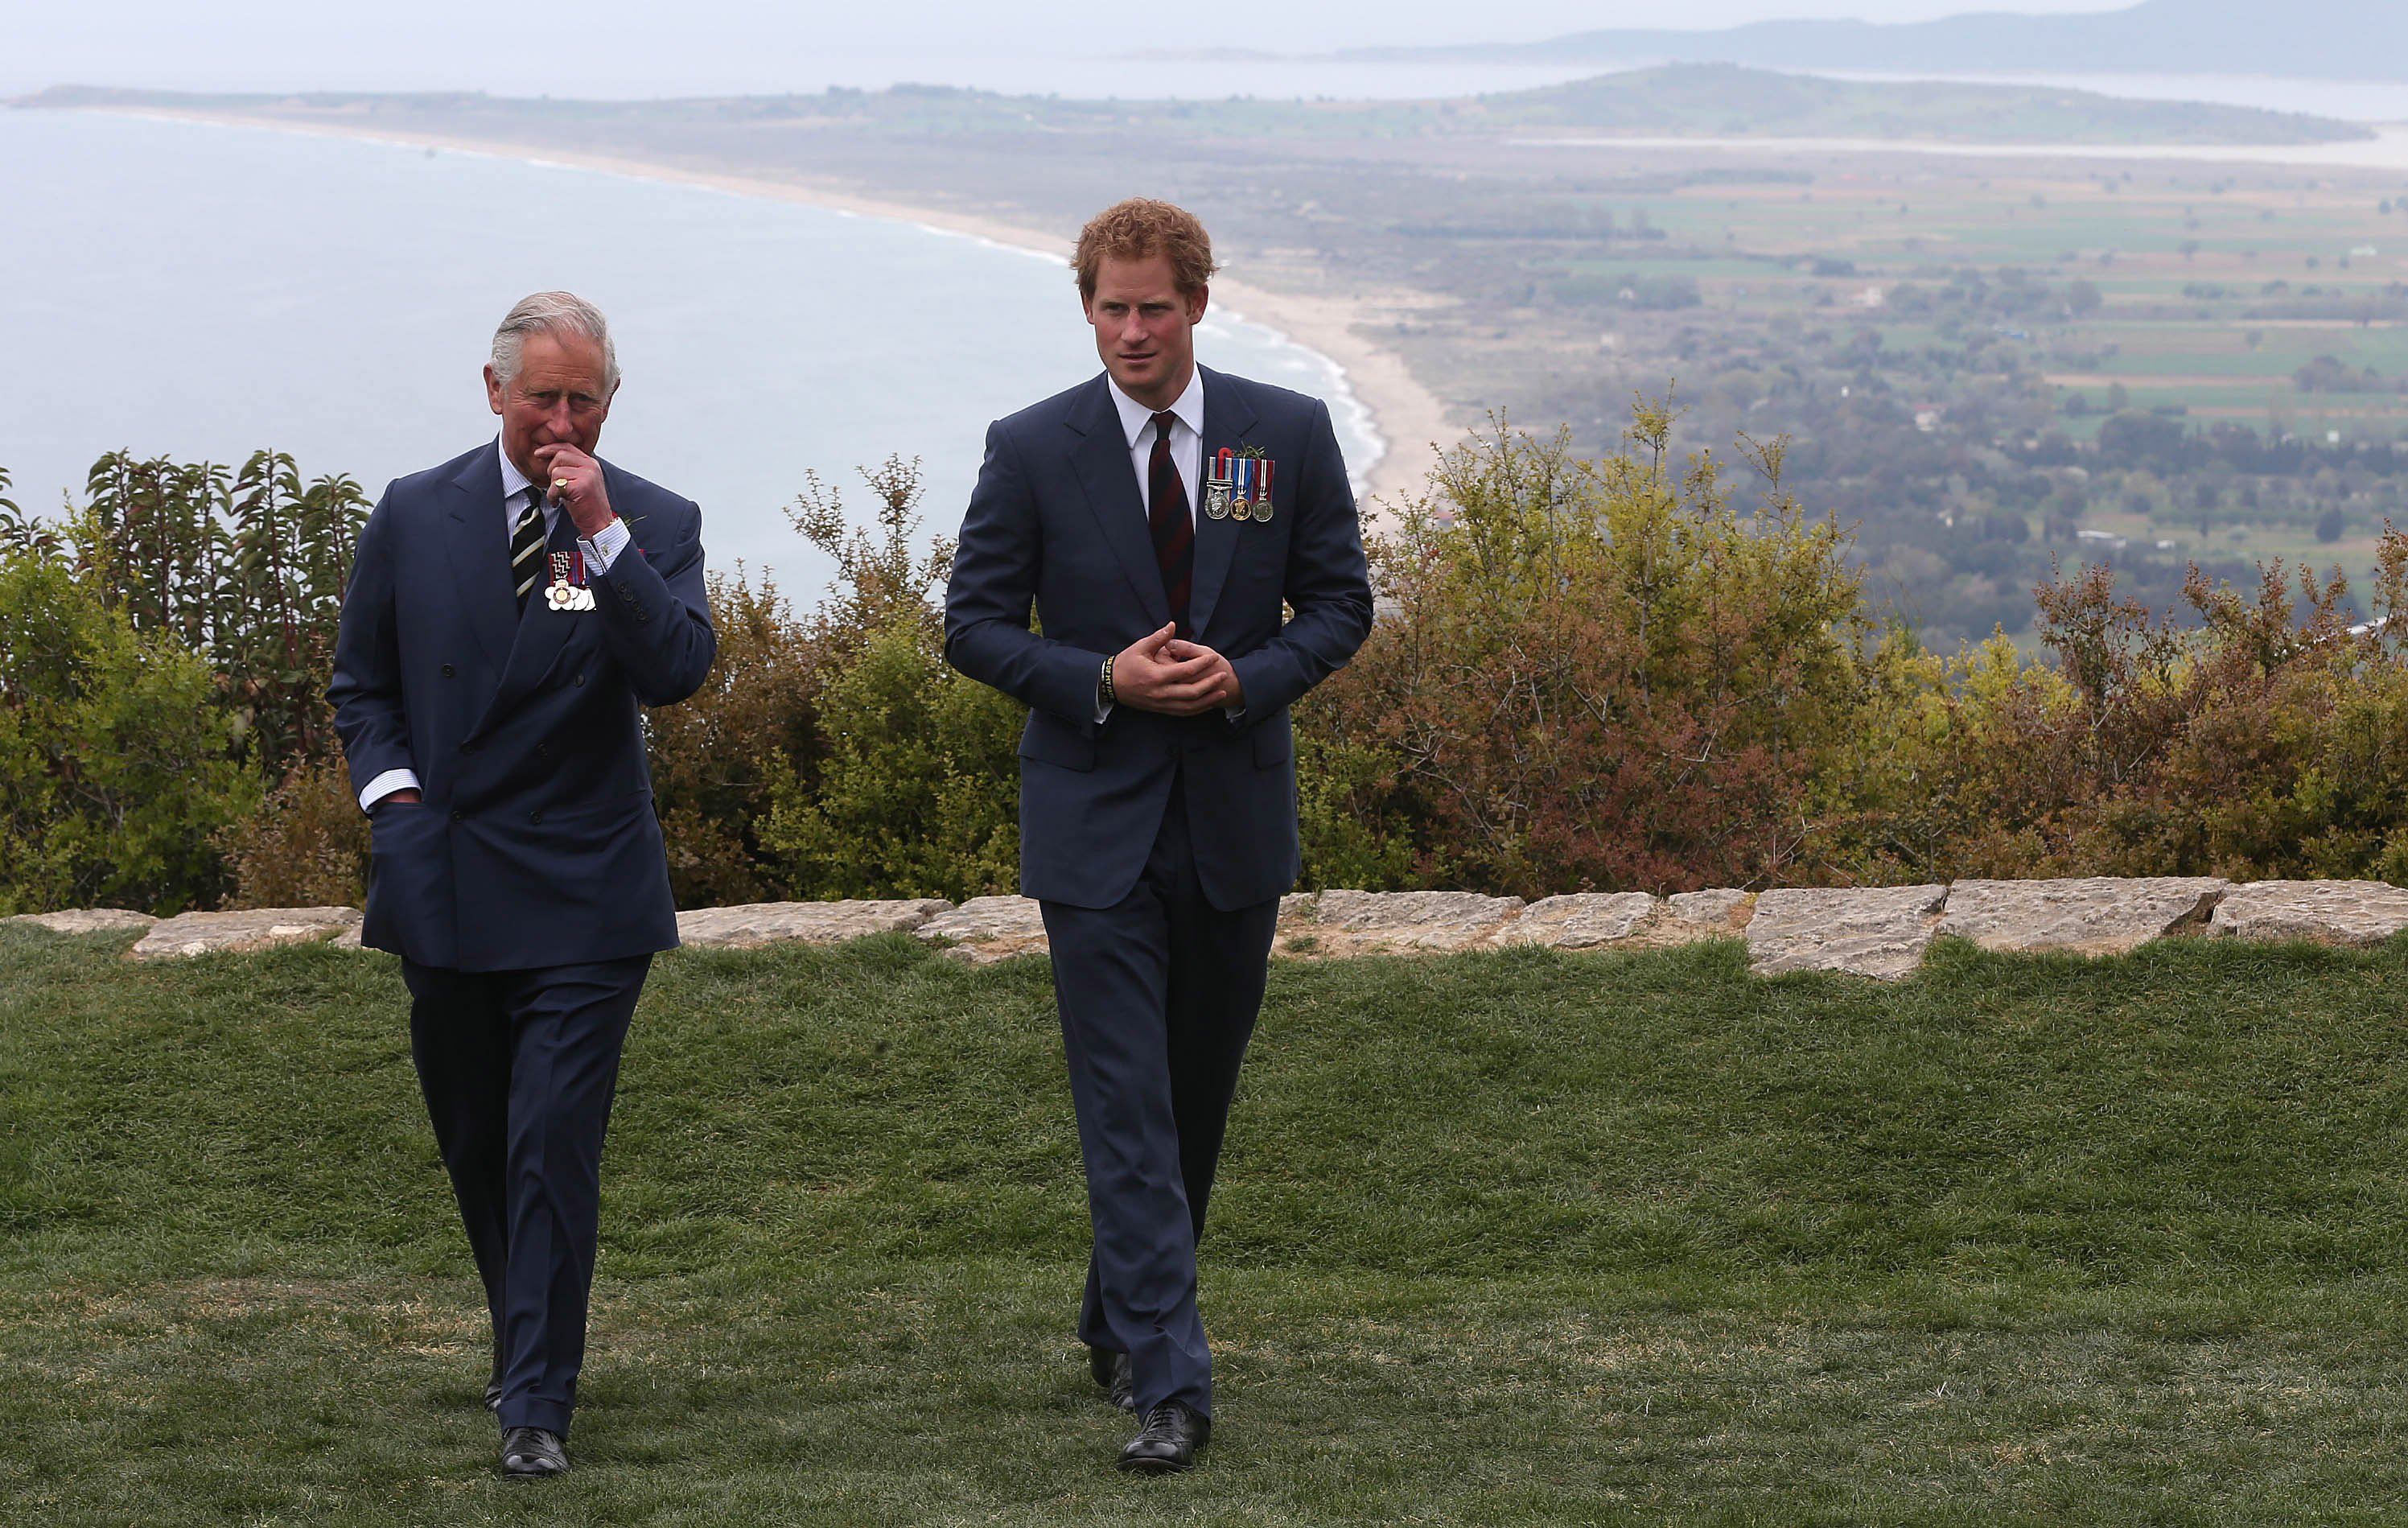 Prince Charles and Prince Harry in Gallipoli Turkey in 2015. | Source: Getty Images